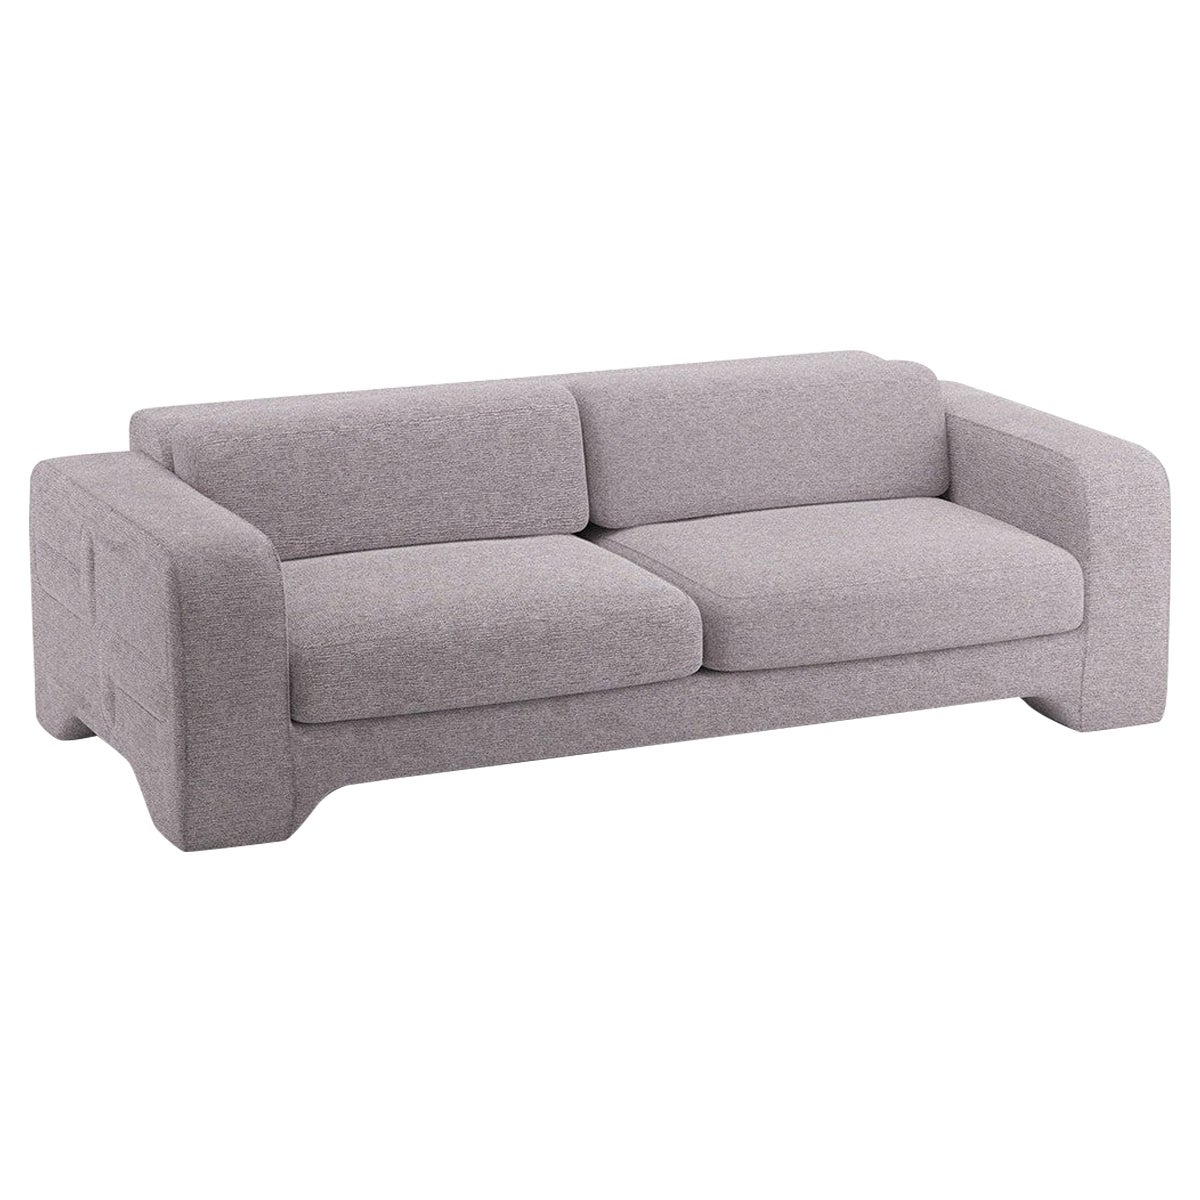 Popus Editions Giovanna 2.5 Seater Sofa in Mouse Megeve Fabric with Knit Effect